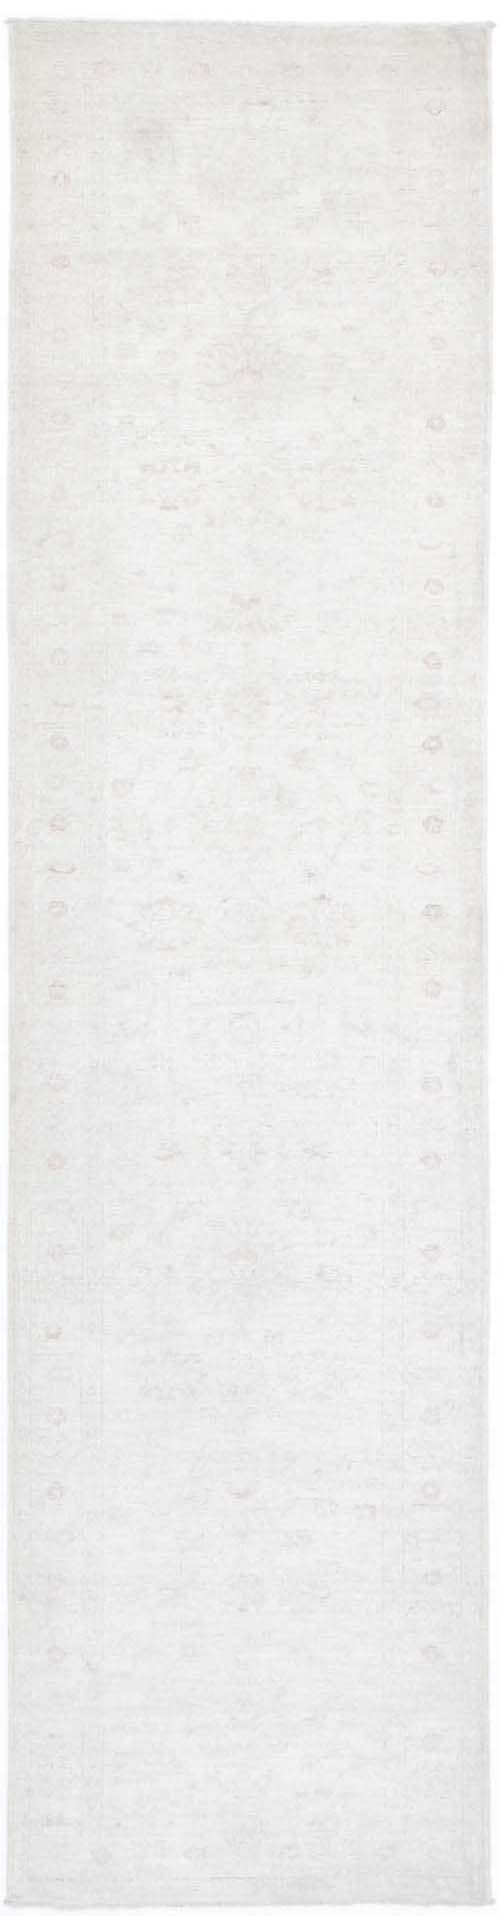 Hand Knotted Serenity Wool Rug - 2'9'' x 12'2''